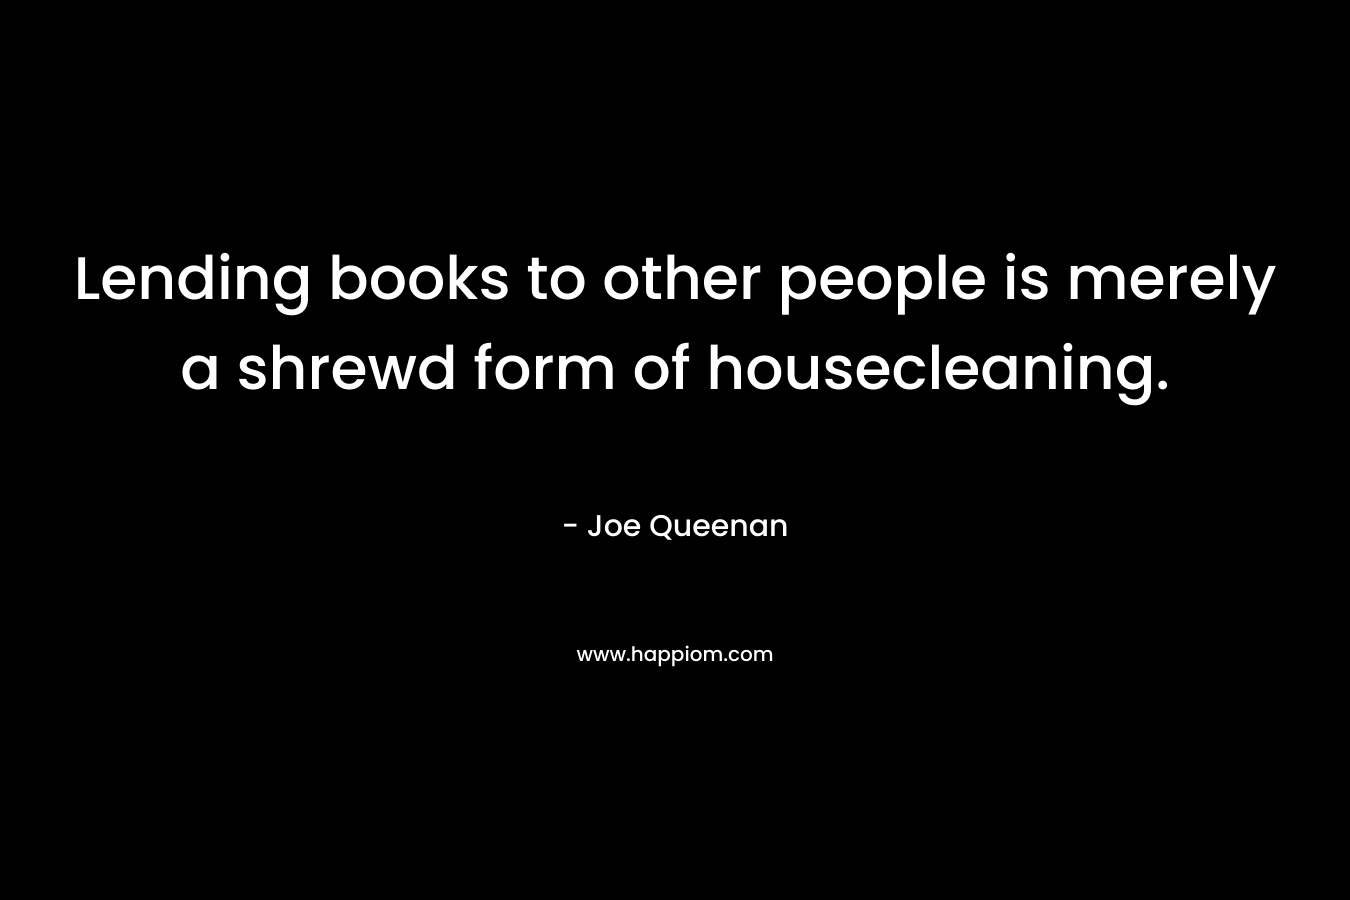 Lending books to other people is merely a shrewd form of housecleaning.